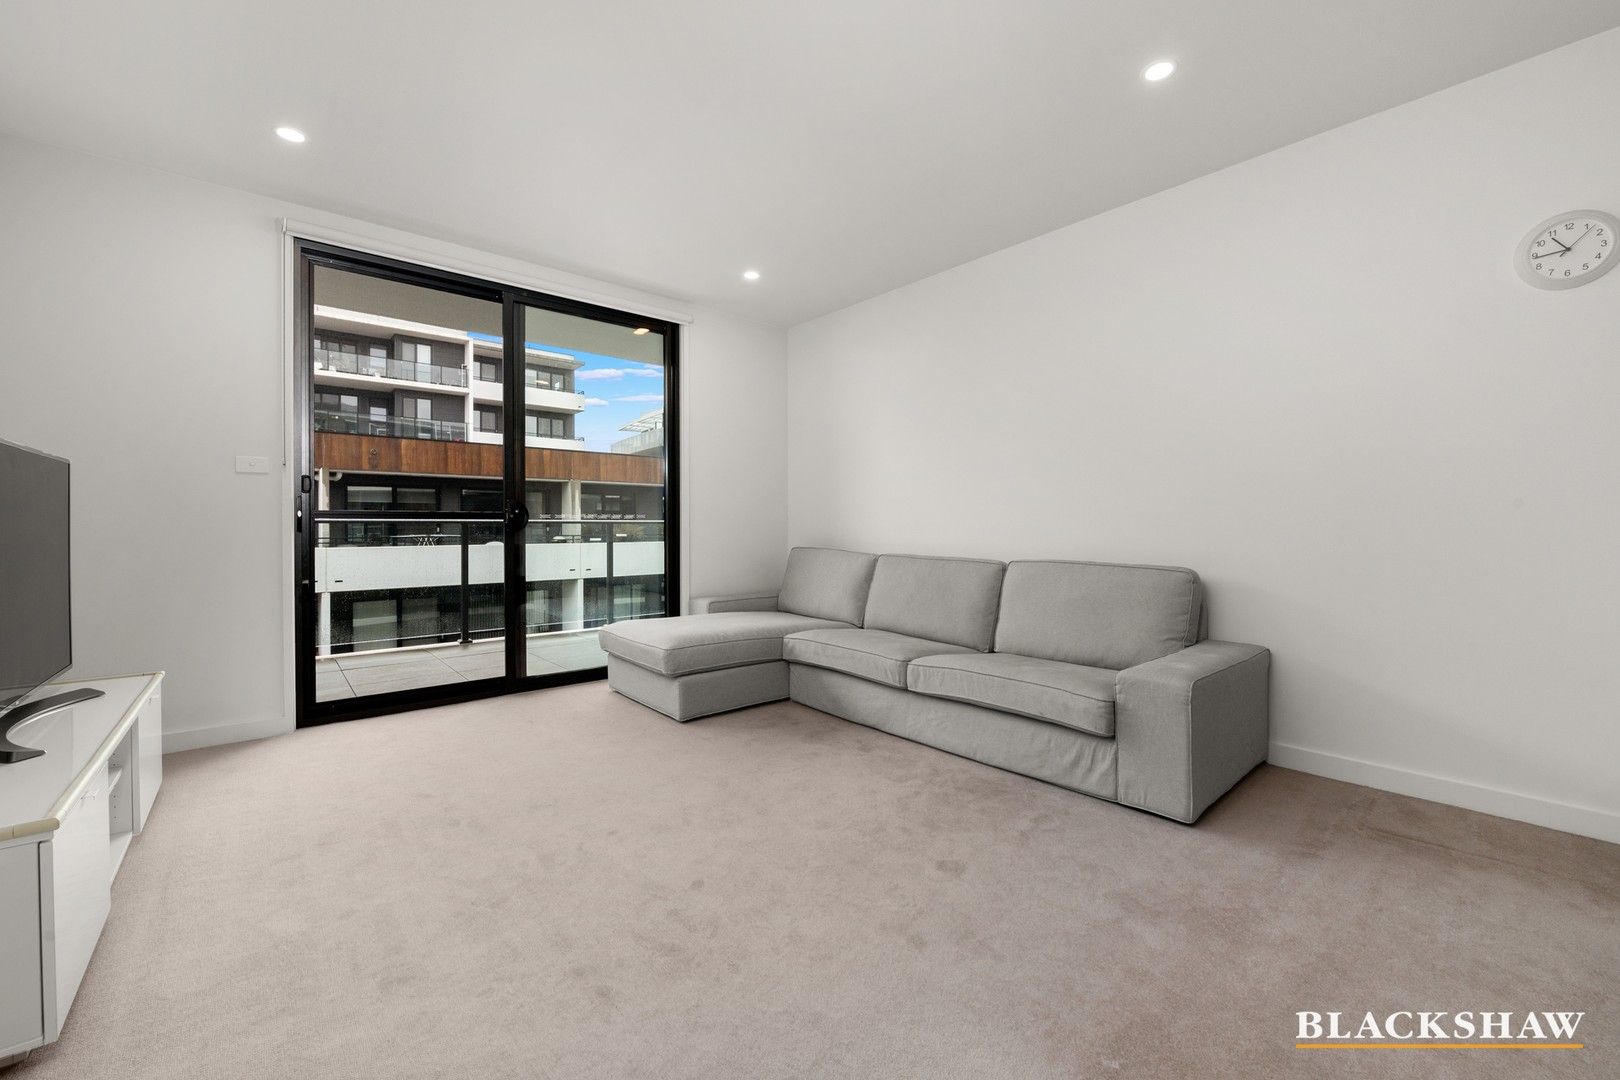 2 bedrooms Apartment / Unit / Flat in 48/74 Leichhardt Street GRIFFITH ACT, 2603